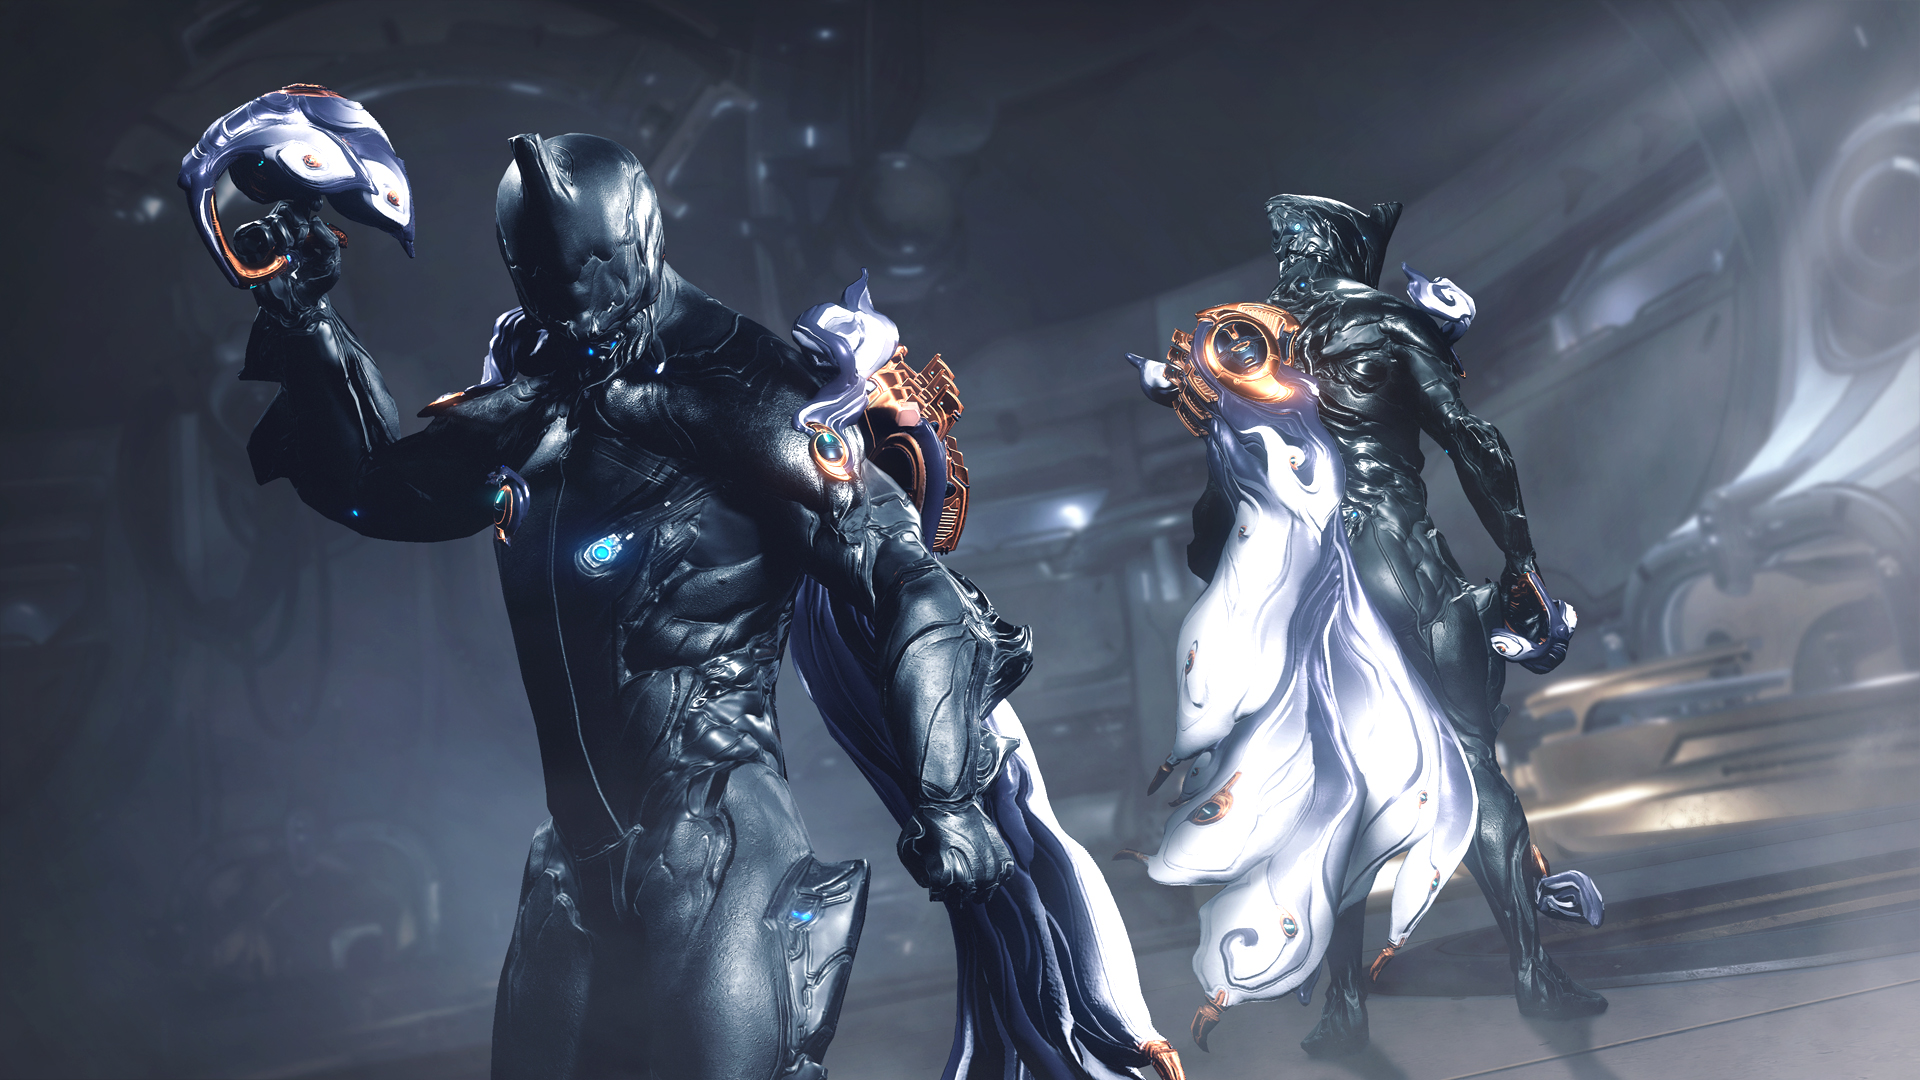 Warframe Cross Save Is The Top Priority After Empyrean I Wish